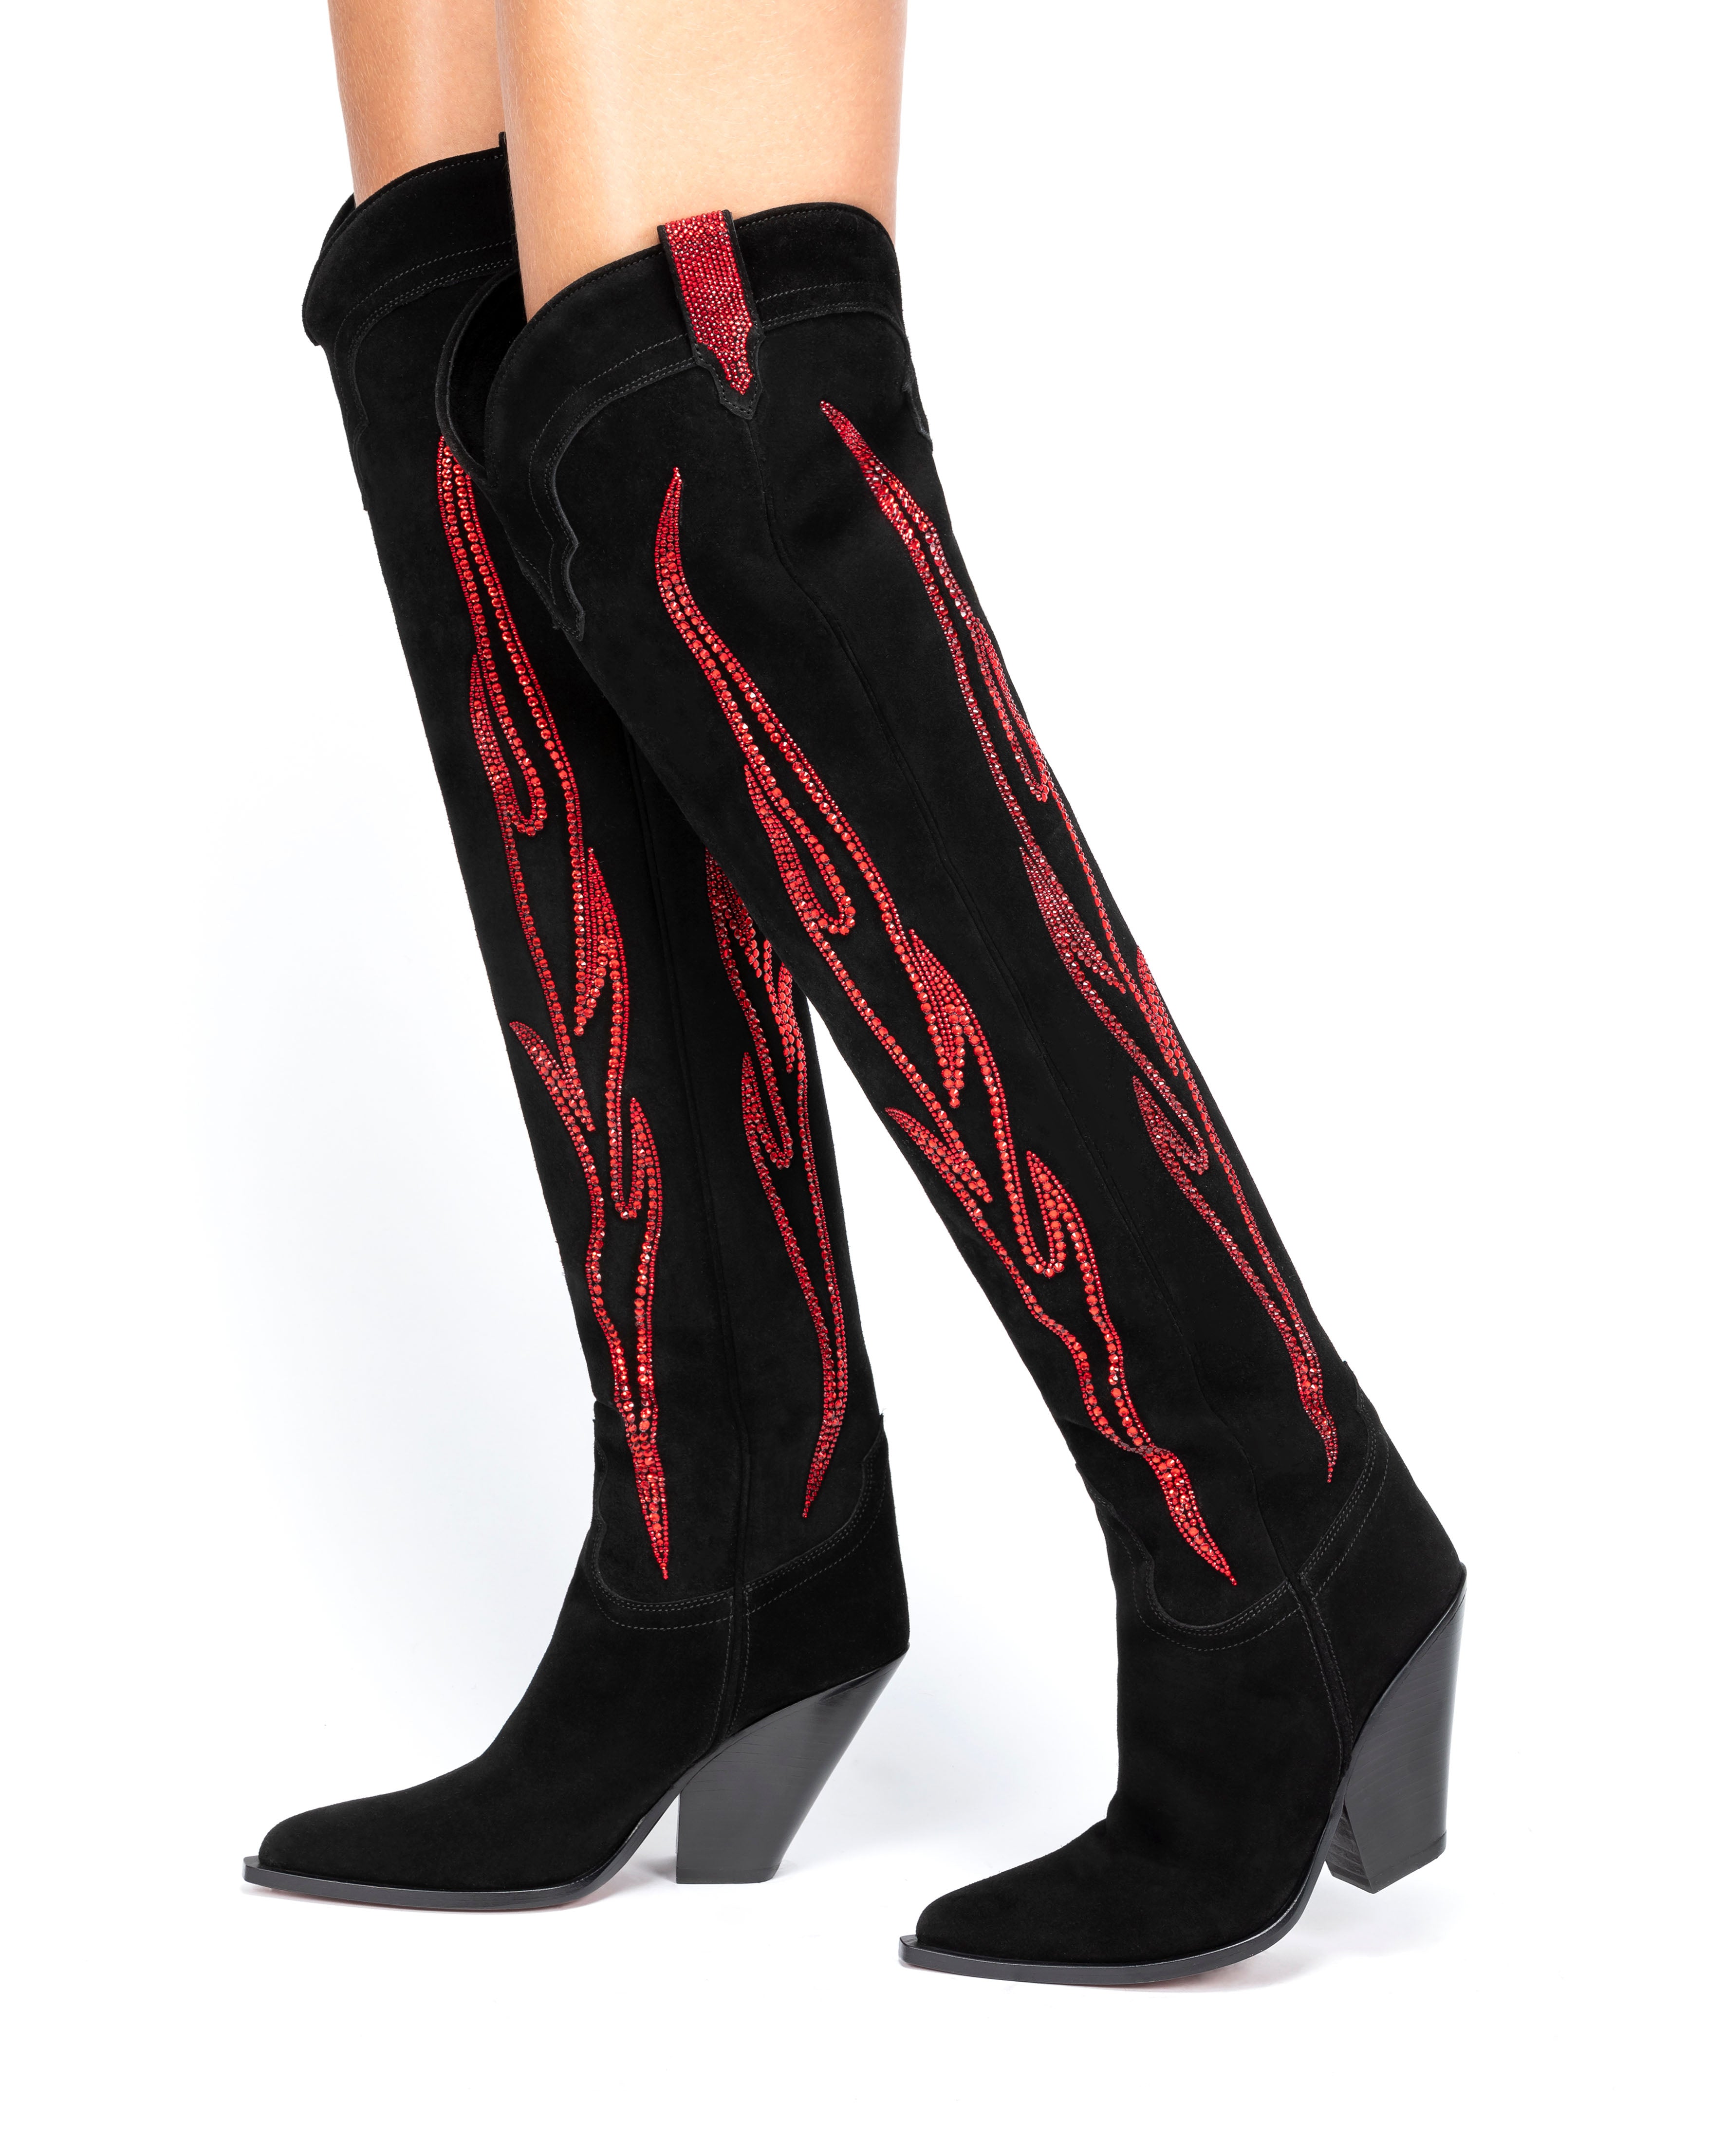 HERMOSA-90-Women_s-Over-The-Knee-Boots-in-Black-Suede-with-Red-Swarovski-Crystals_05